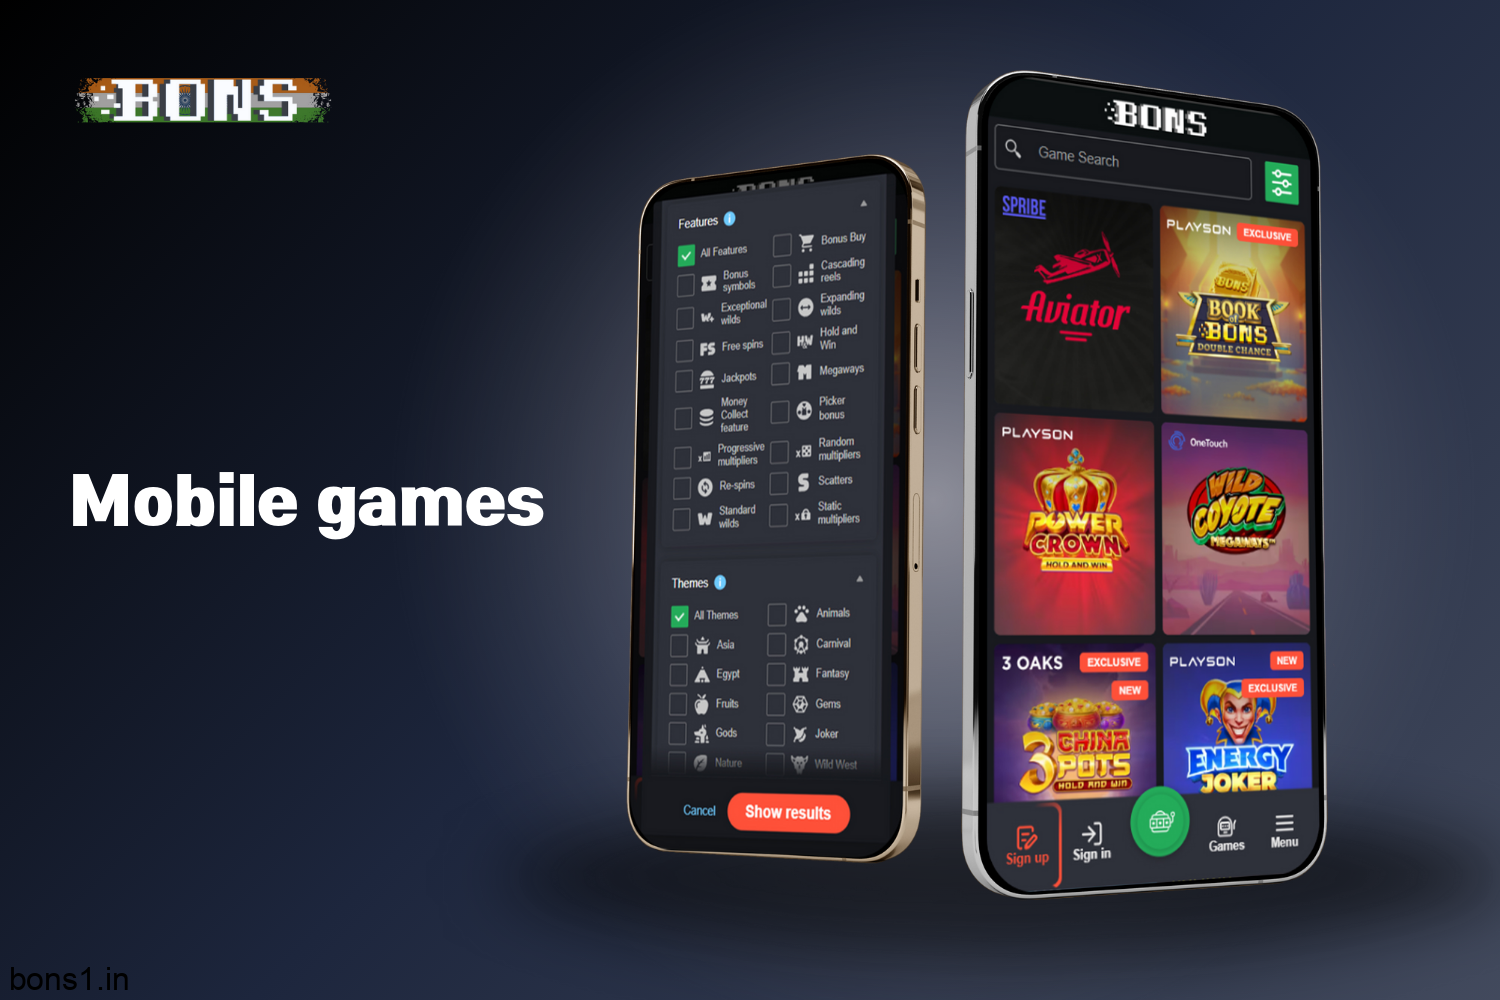 The Bons Casino app has a large selection of mobile games for users from India